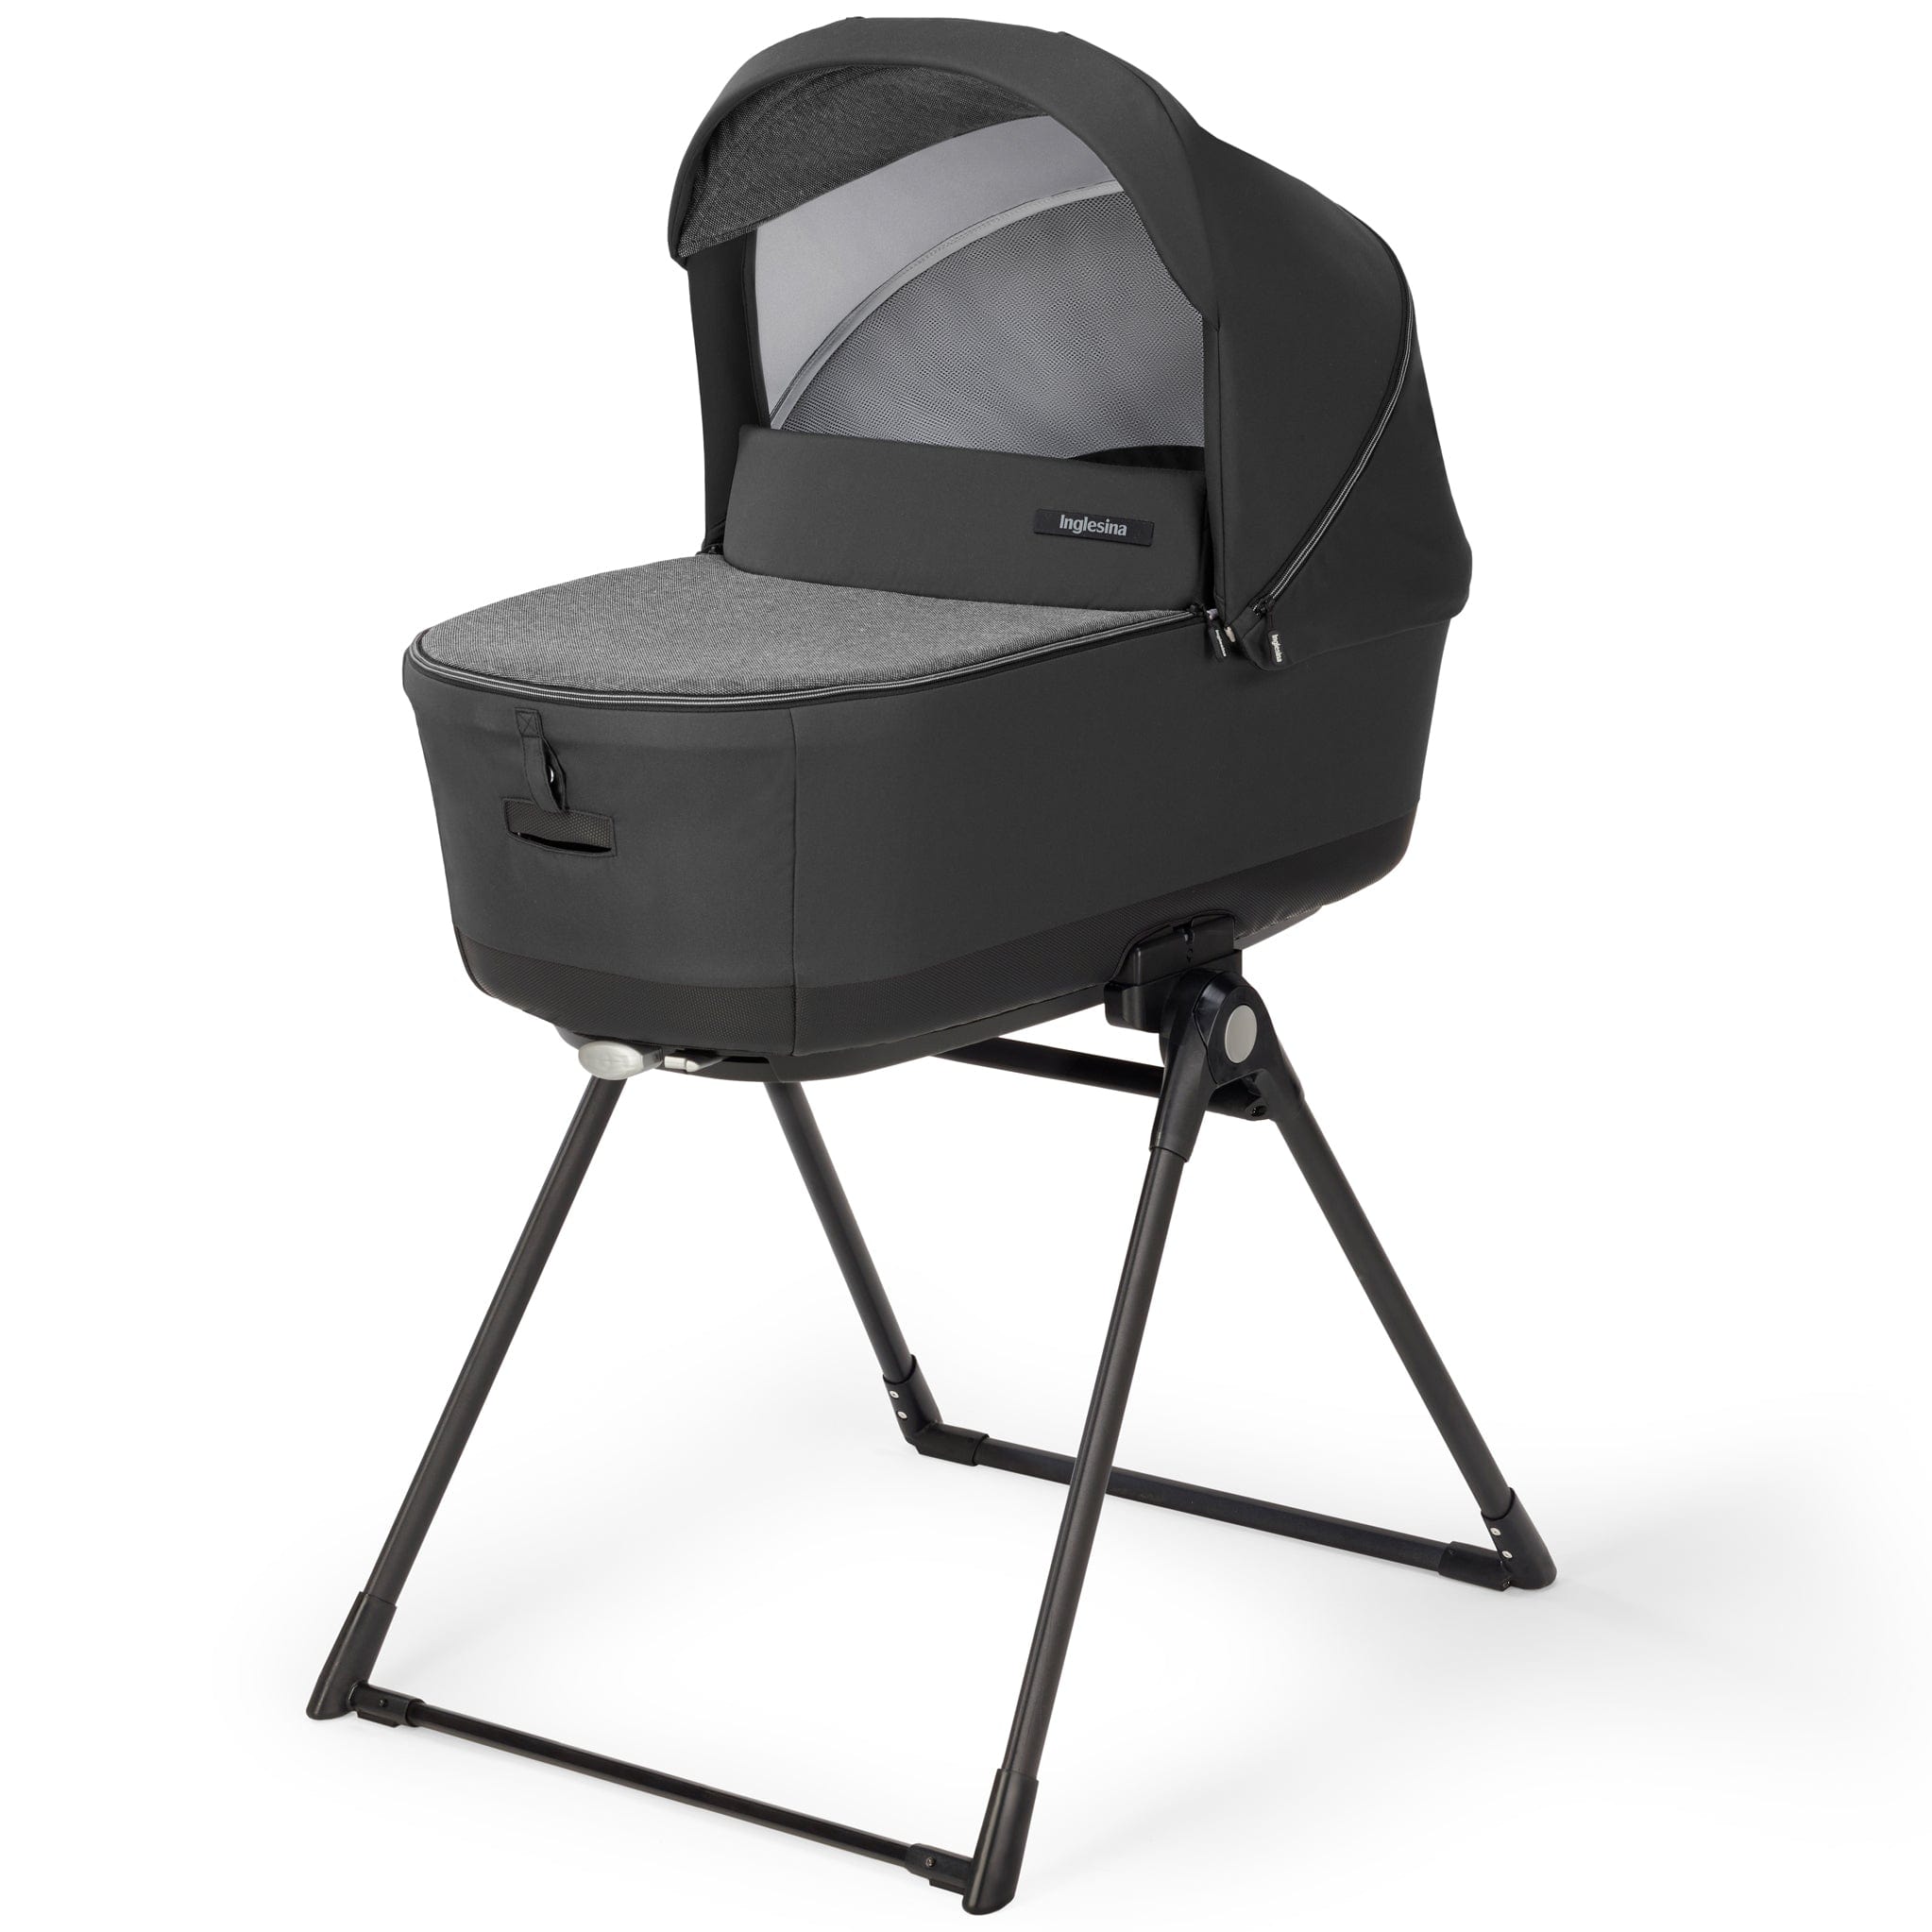 Inglesina travel systems Inglesina Electa System Quattro in Upper Black with Darwin car seat and i-Size base ELC-UPP-BLK